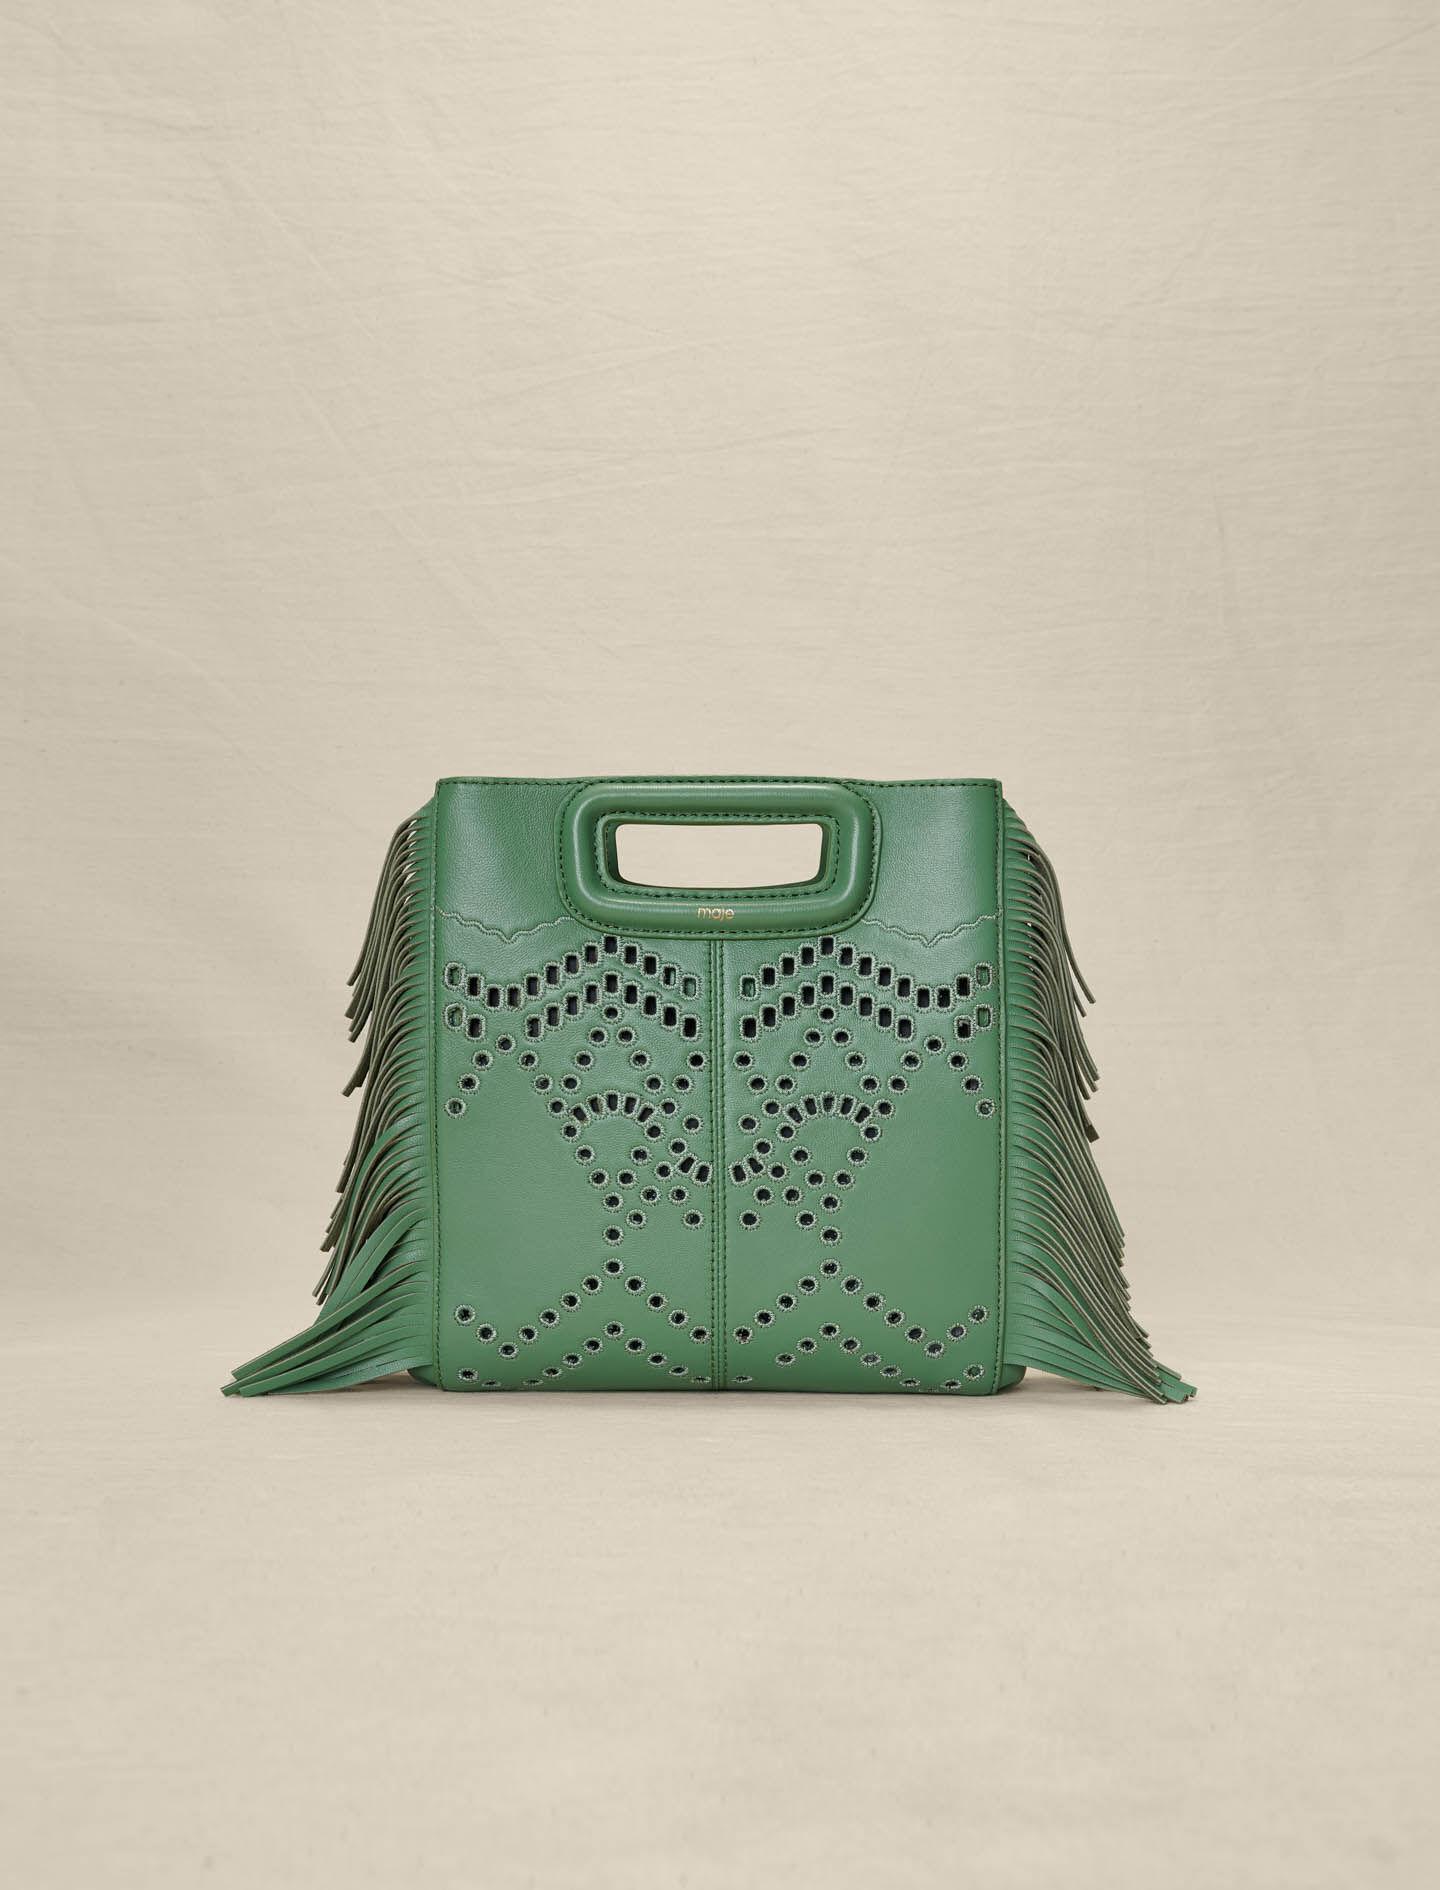 Maje M Perforated Leather Shoulder Bag in Green